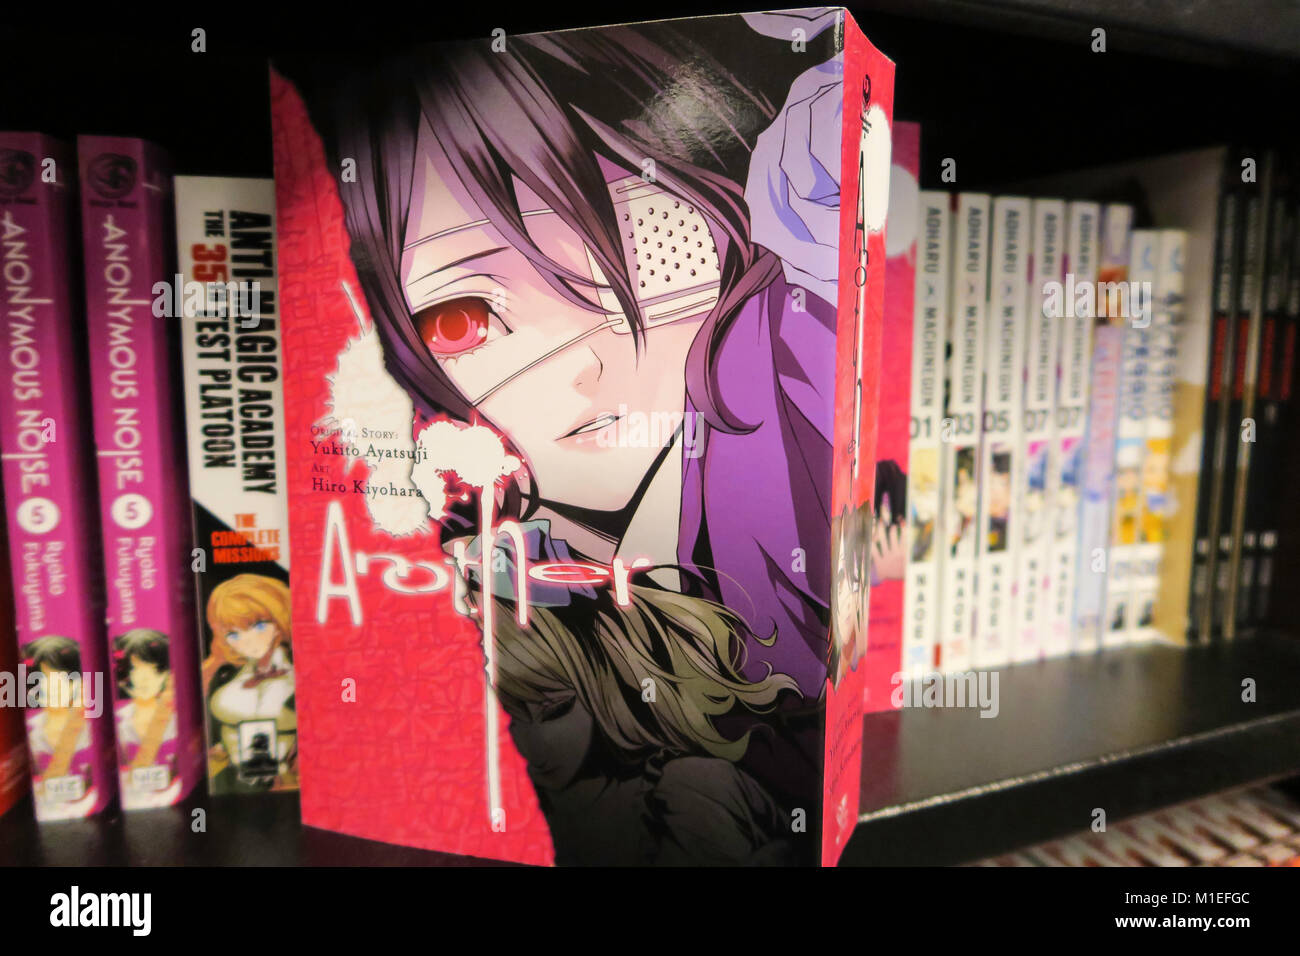 Anime Books At Barnes And Noble